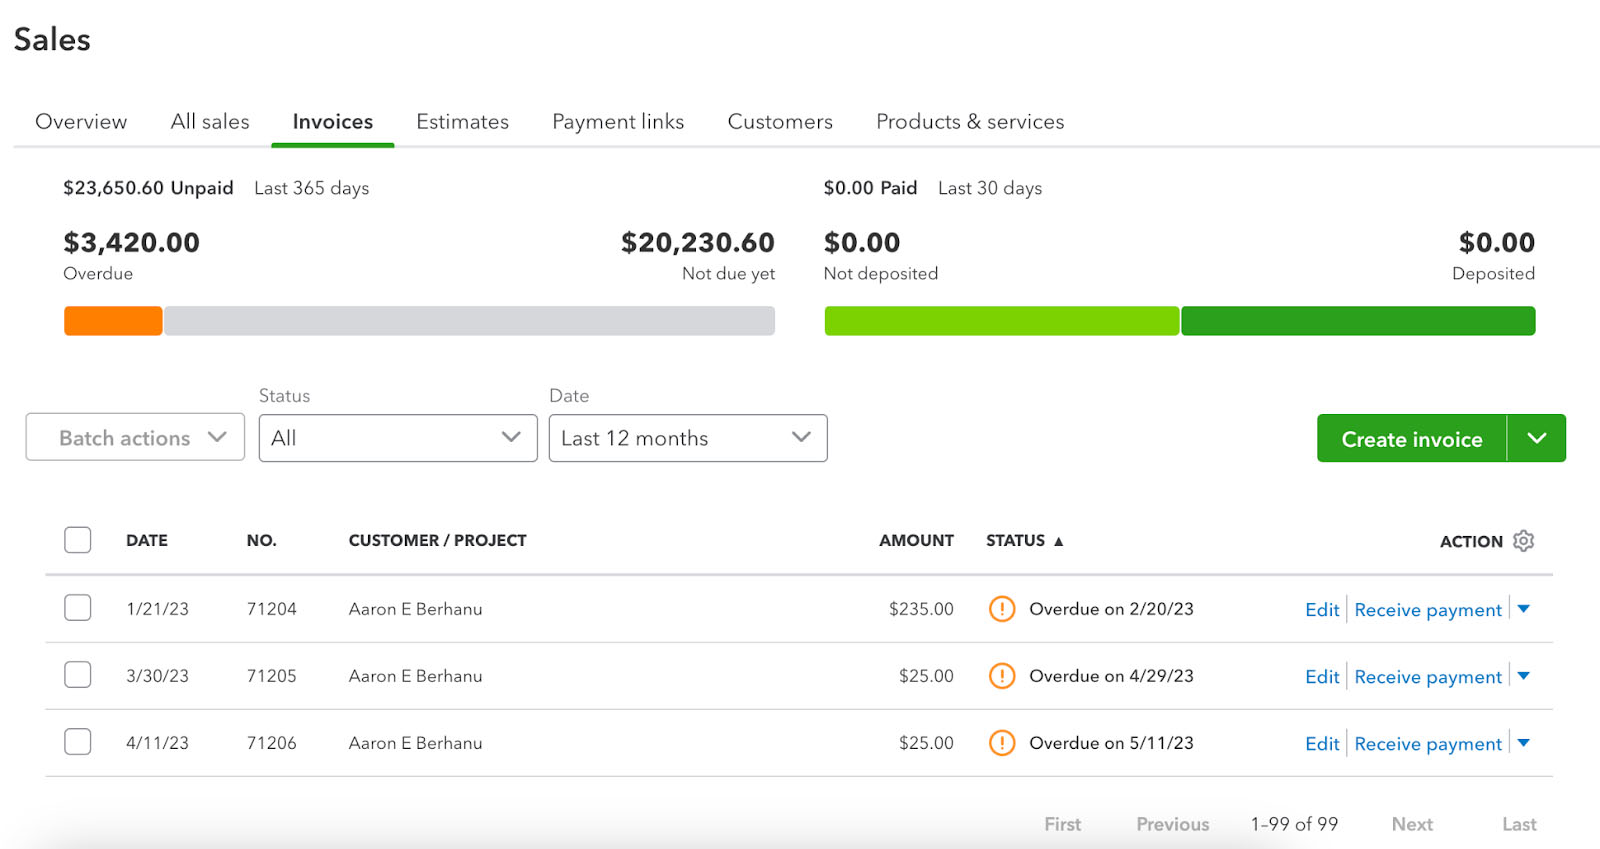 Image showing the invoice tracking dashboard of QuickBooks Online.